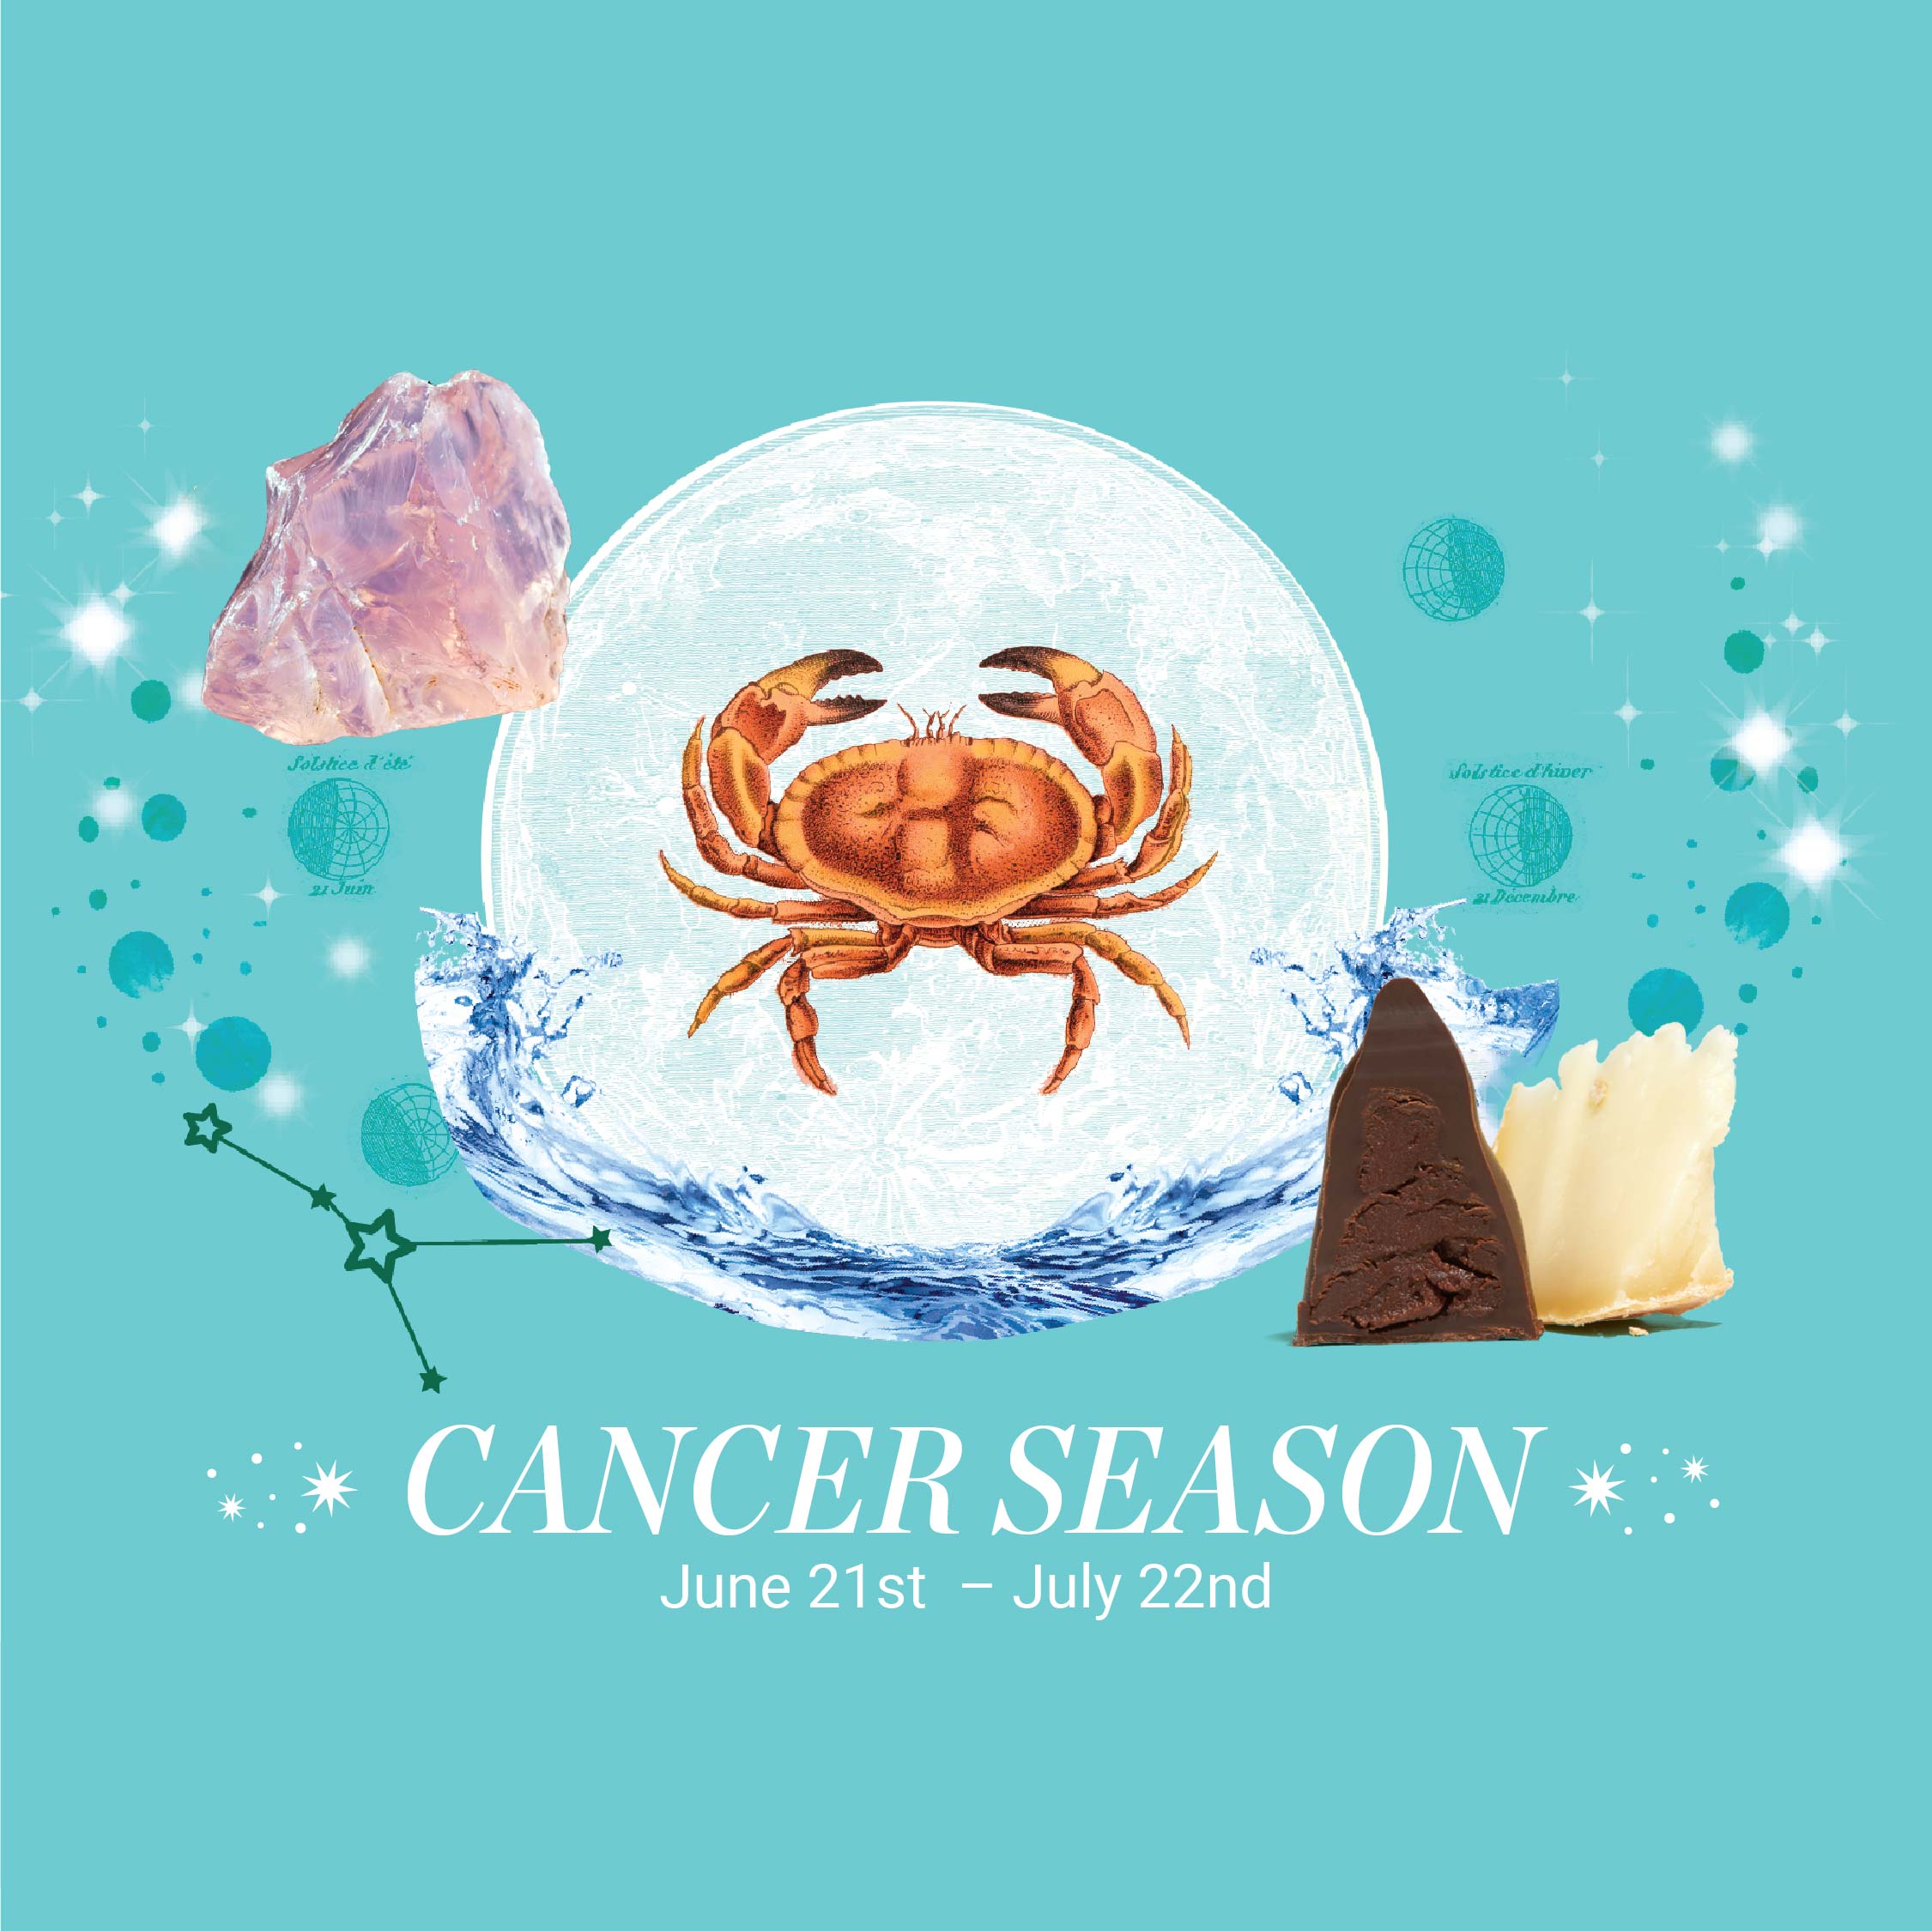 vosges-haut-chocolat-blog/3-chocolate-gifts-for-cancer-season